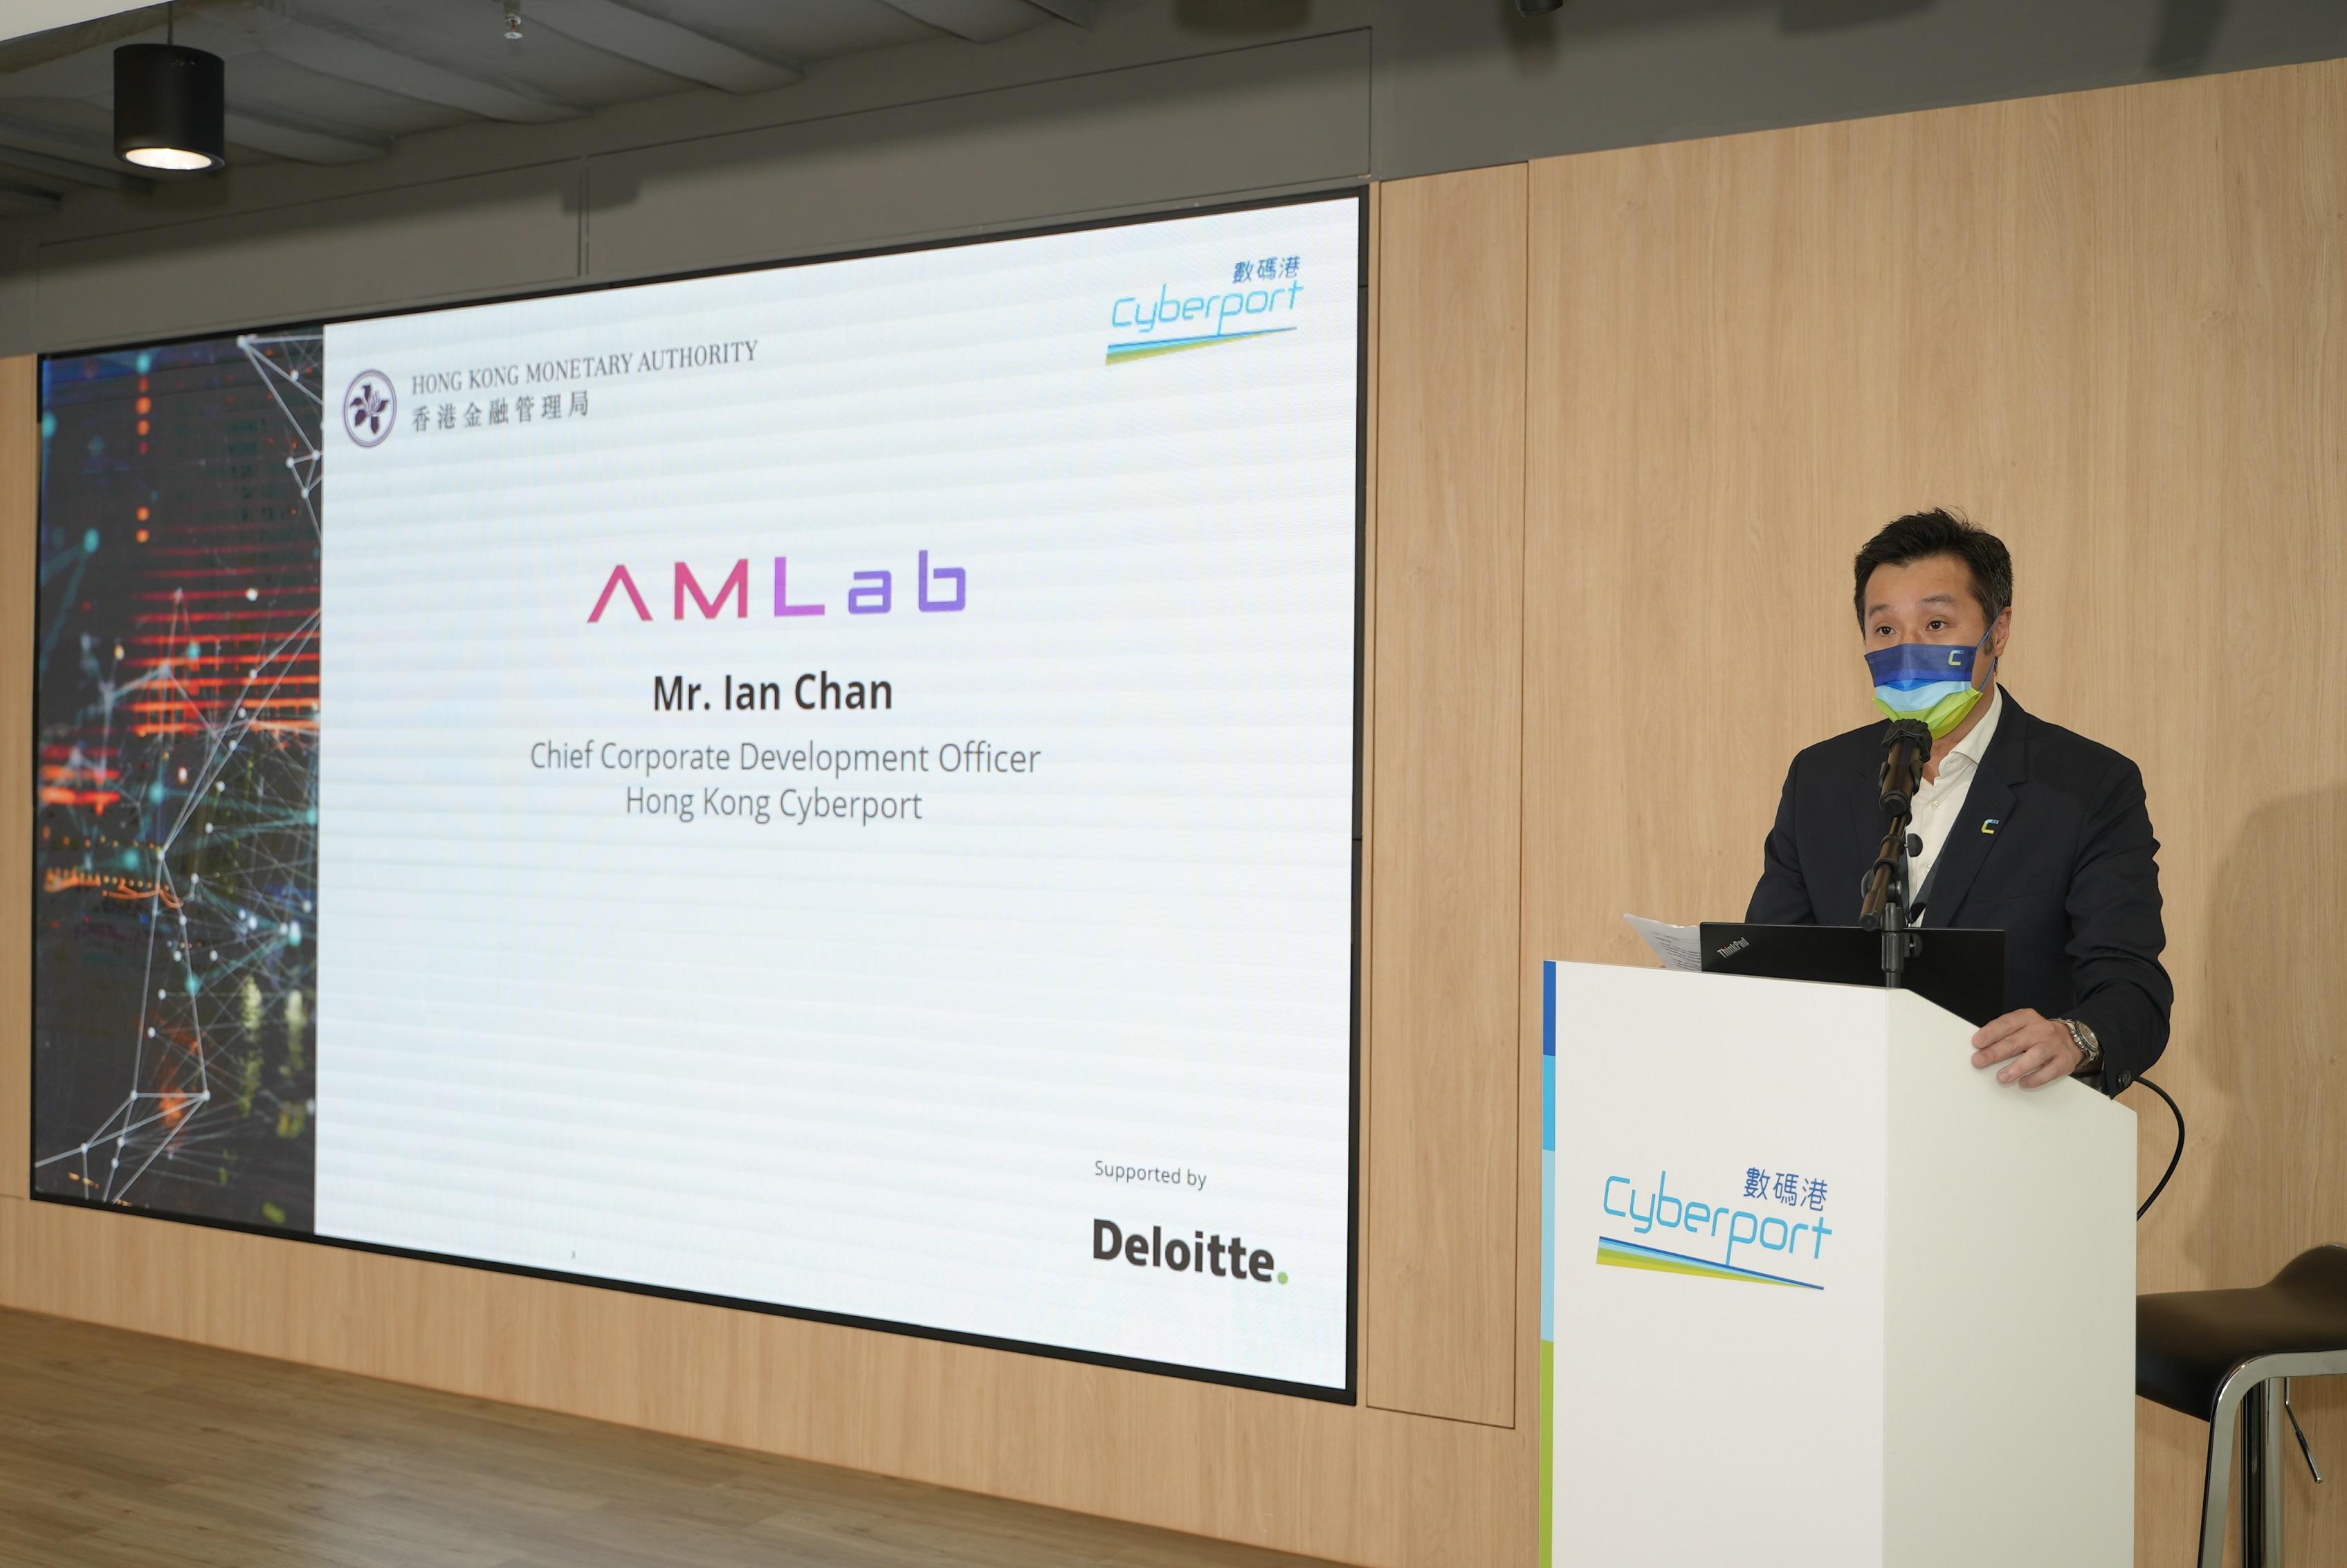 The Hong Kong Monetary Authority and Cyberport co-hosted the third Anti-Money Laundering Regtech Lab (AMLab 3) today (November 24), with support from Deloitte. Photo shows the Chief Corporate Development Officer of the Cyberport, Mr Ian Chan, delivering remarks at the AMLab 3.